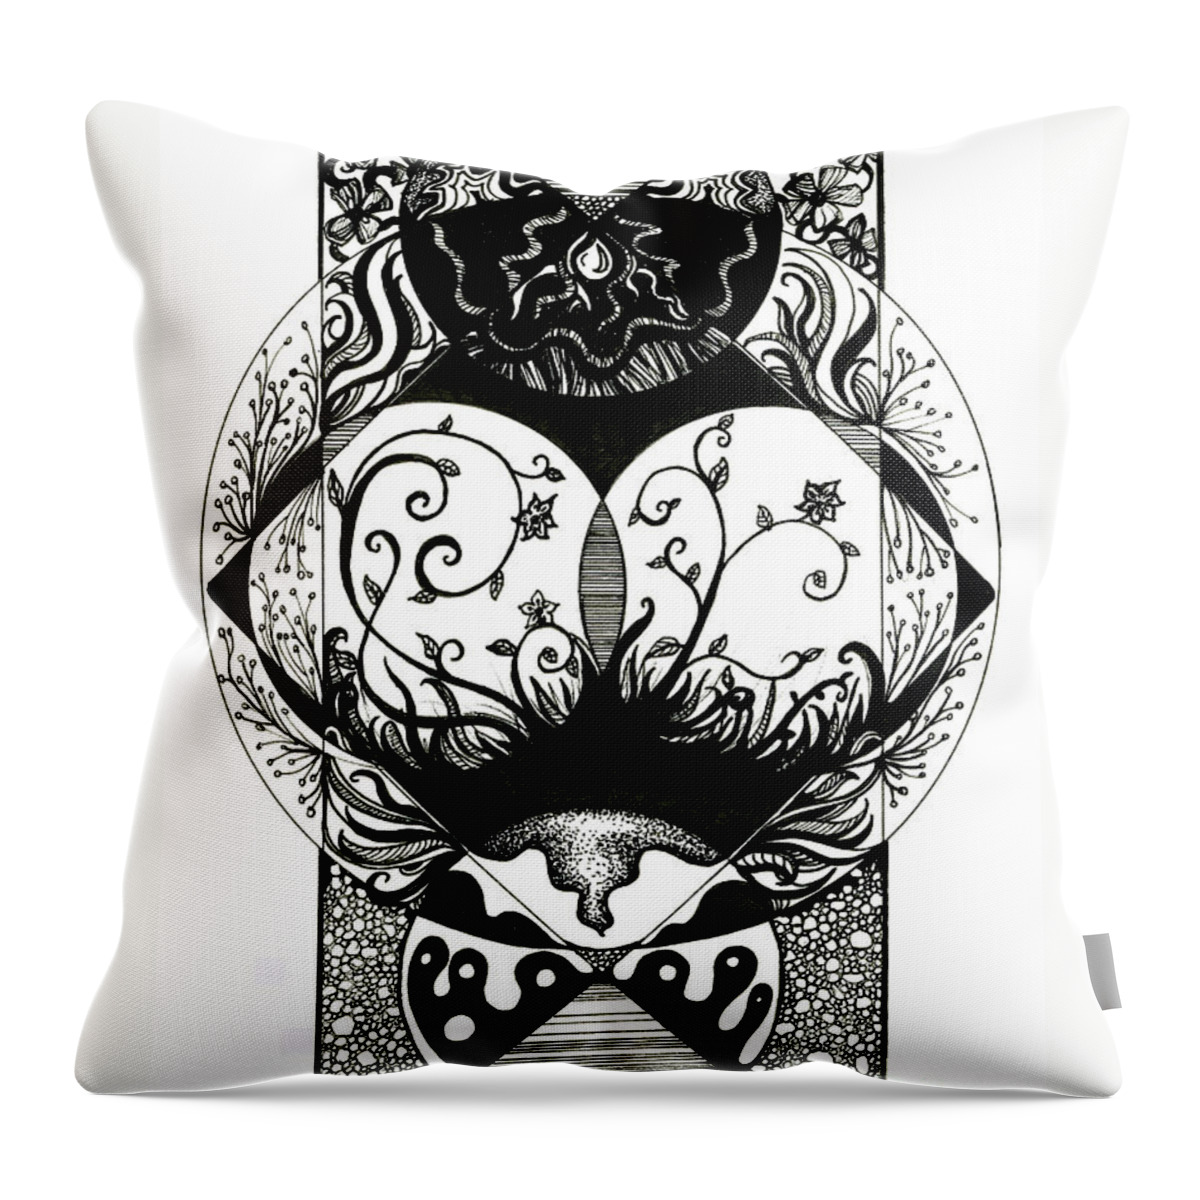 Earth Throw Pillow featuring the drawing Tranquility by Danielle Scott